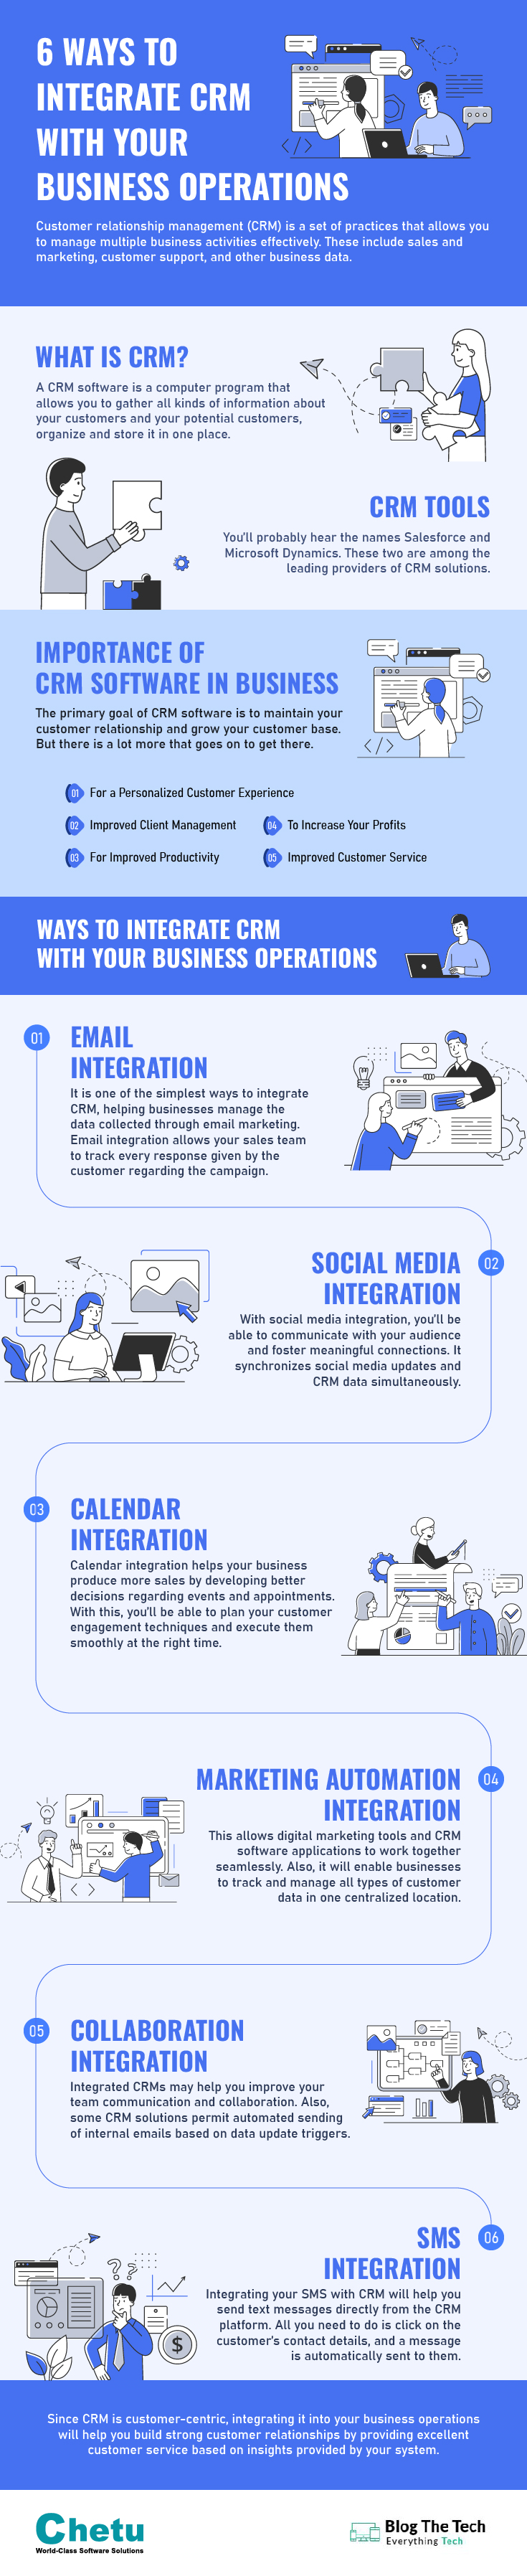 Infographic on 6 Ways To Integrate CRM With Your Business Operations